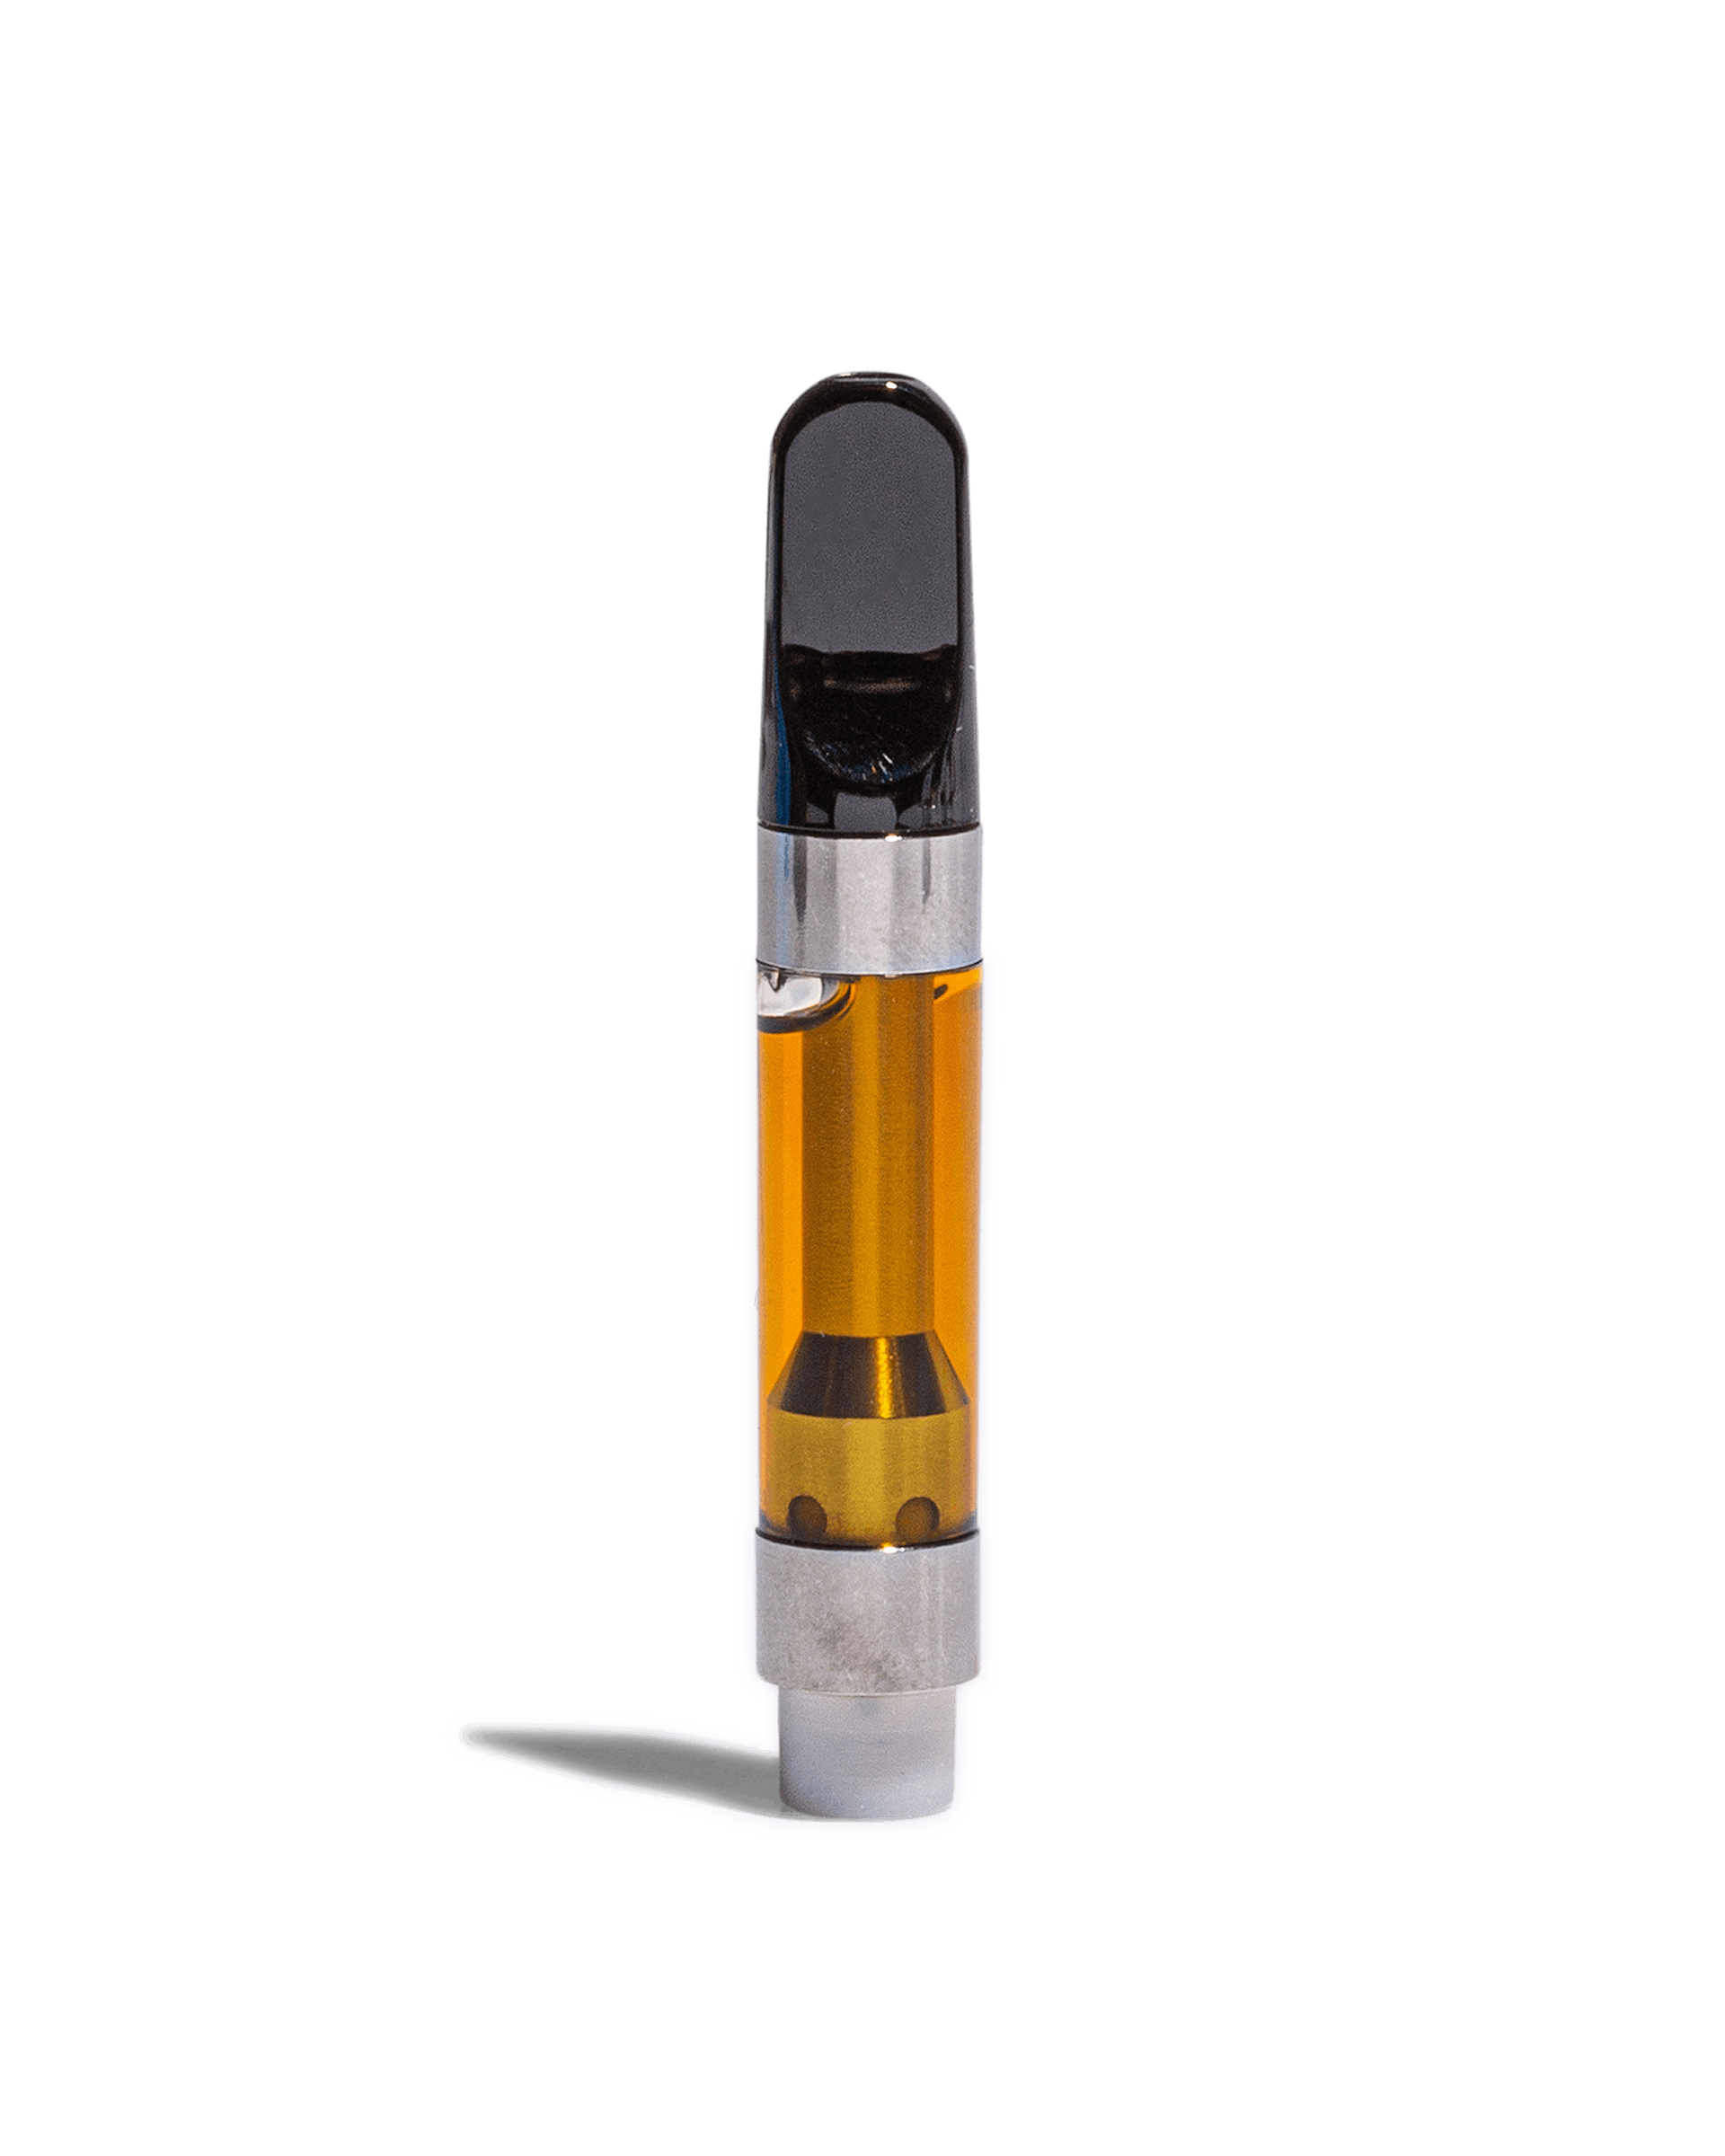 DUCT TAPE LIVE RESIN CART 1G